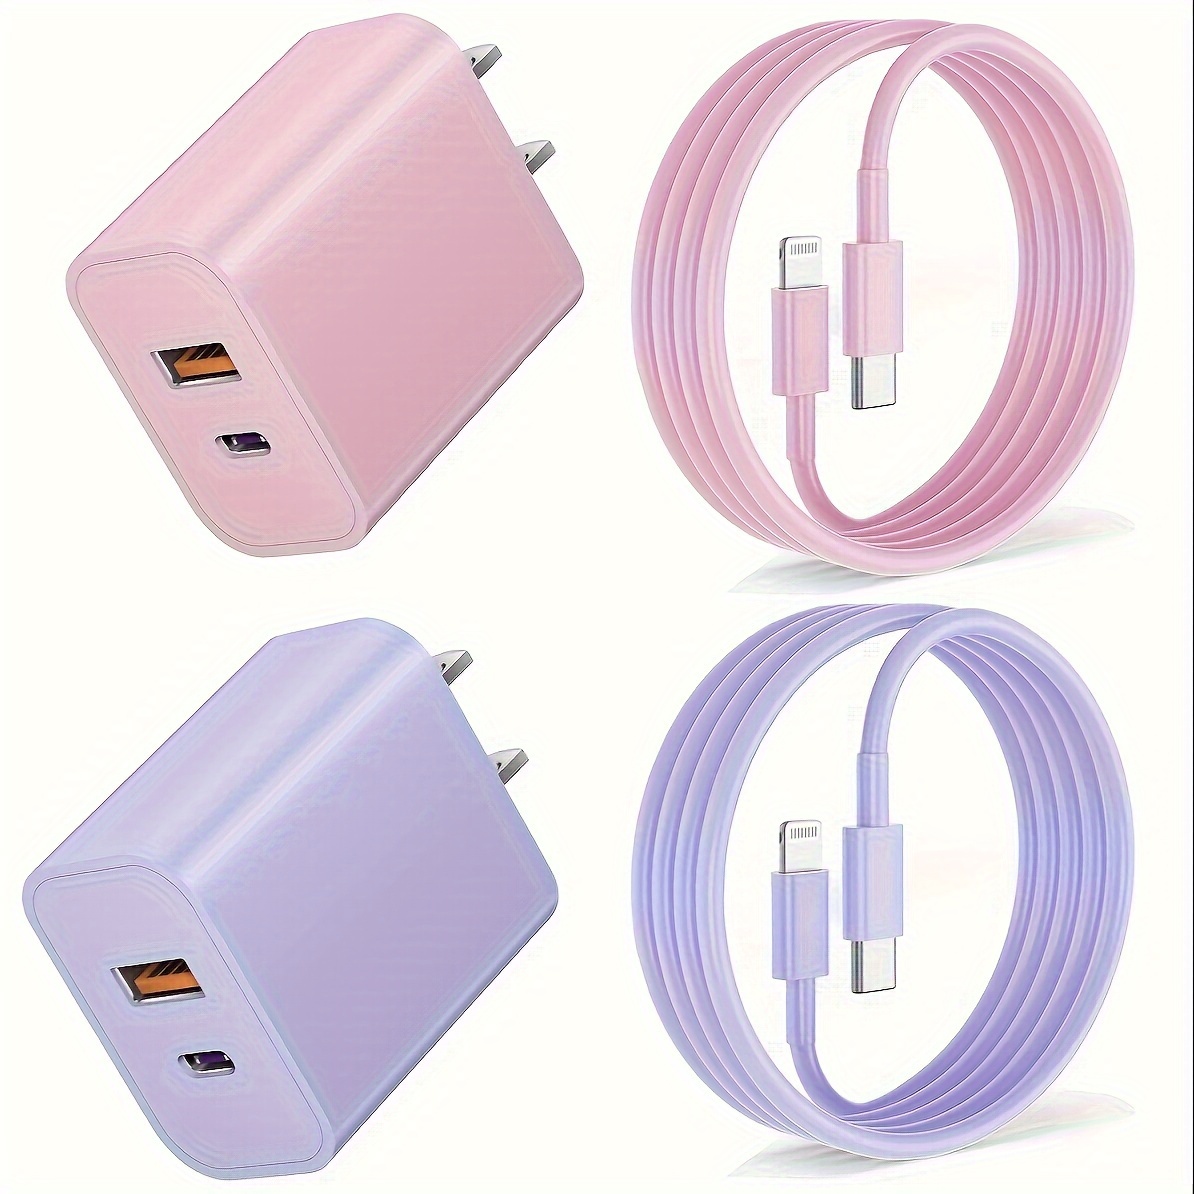 

For Iphone 14131211 Quick Charger ( 2 Piece Pack)20w Pd Dual Port Power Wall Charger With 6ft Charging Cable Compatible With Iphone 14/14max/14pro/13/13pro Max/12/12pro/12pro Max/11, I.